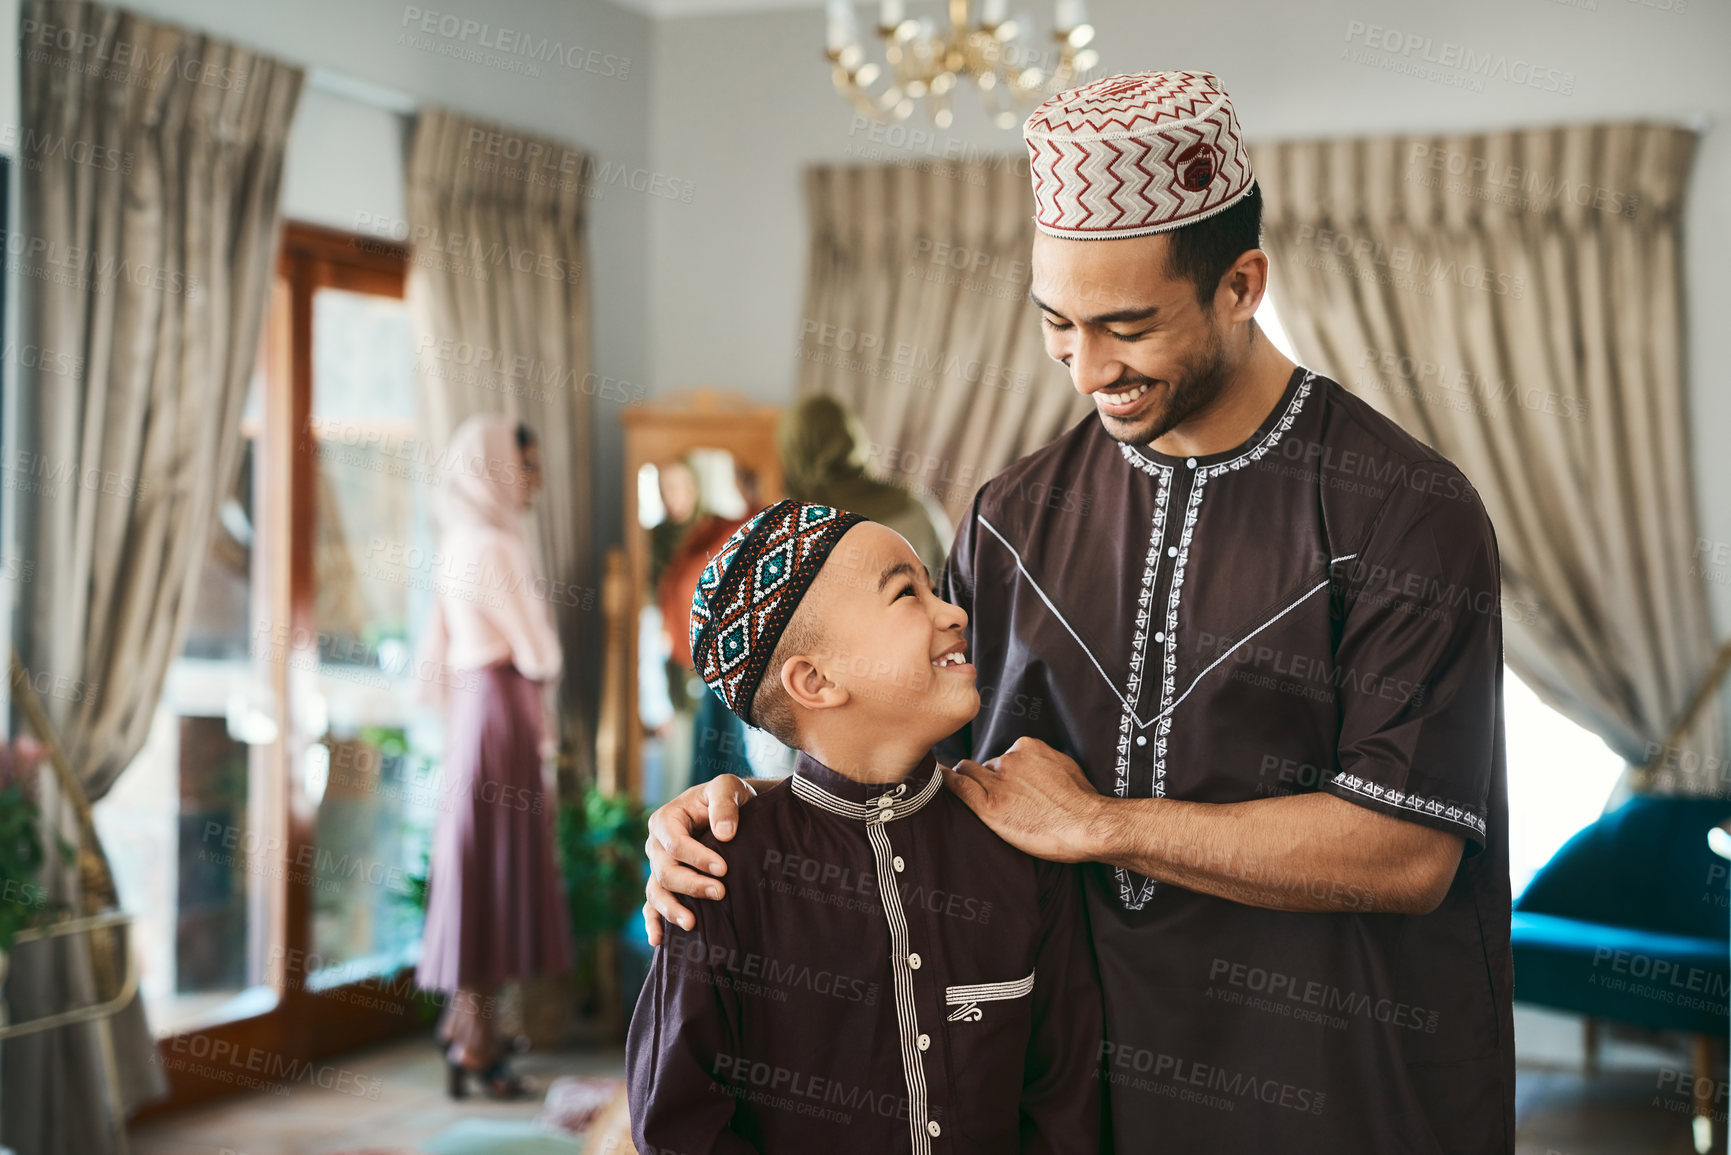 Buy stock photo Shot of a muslim father embracing his son